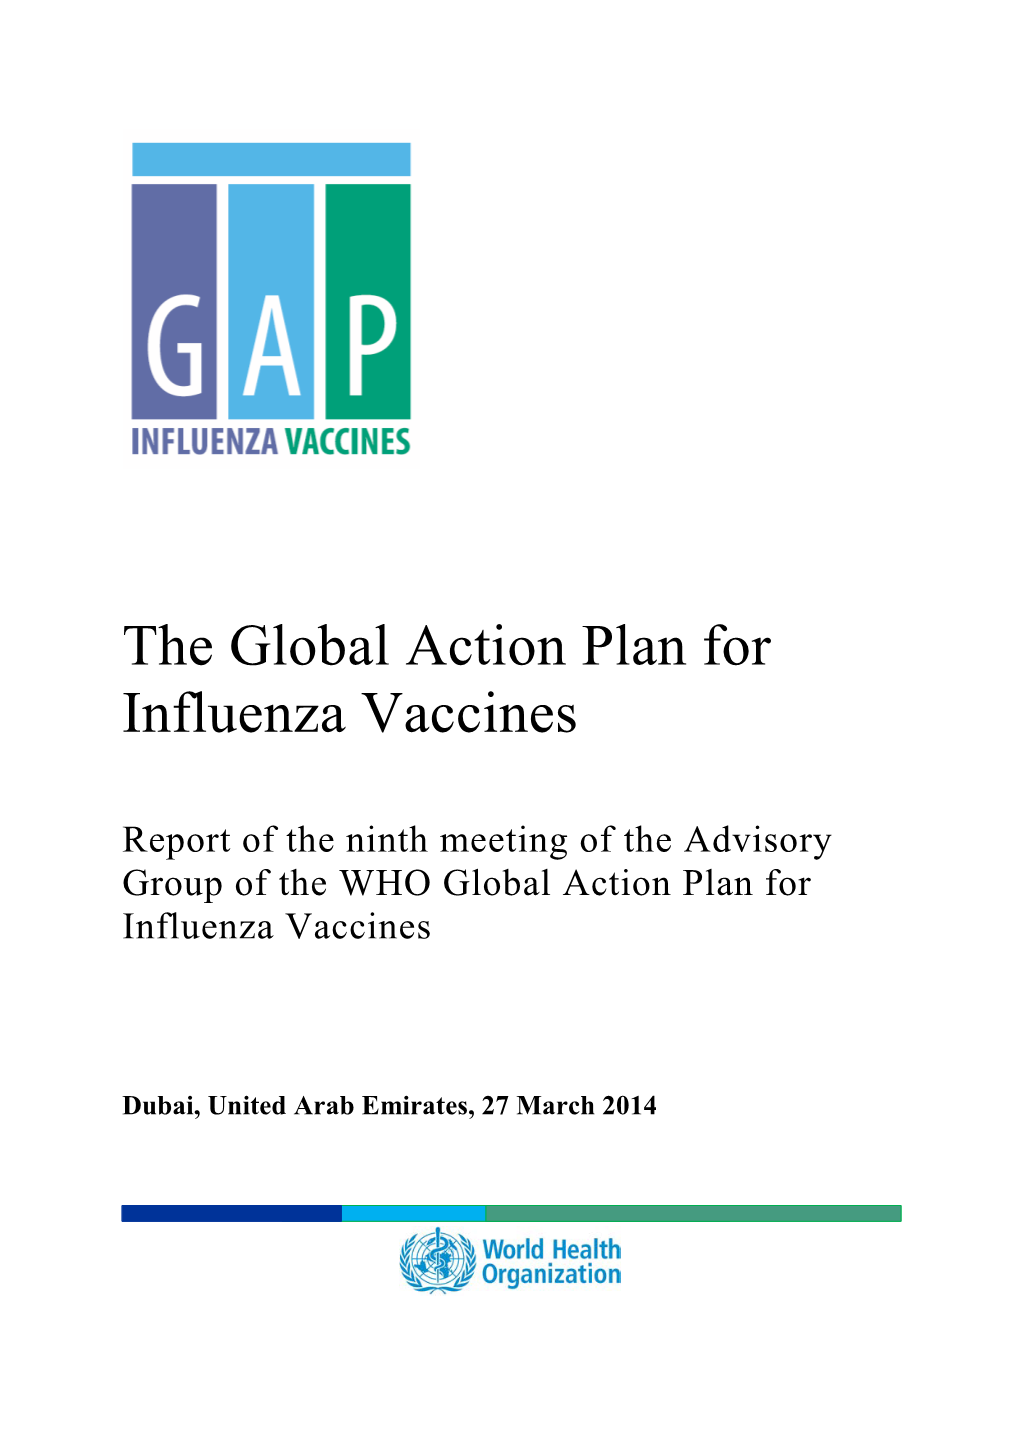 The Global Action Plan for Influenza Vaccines